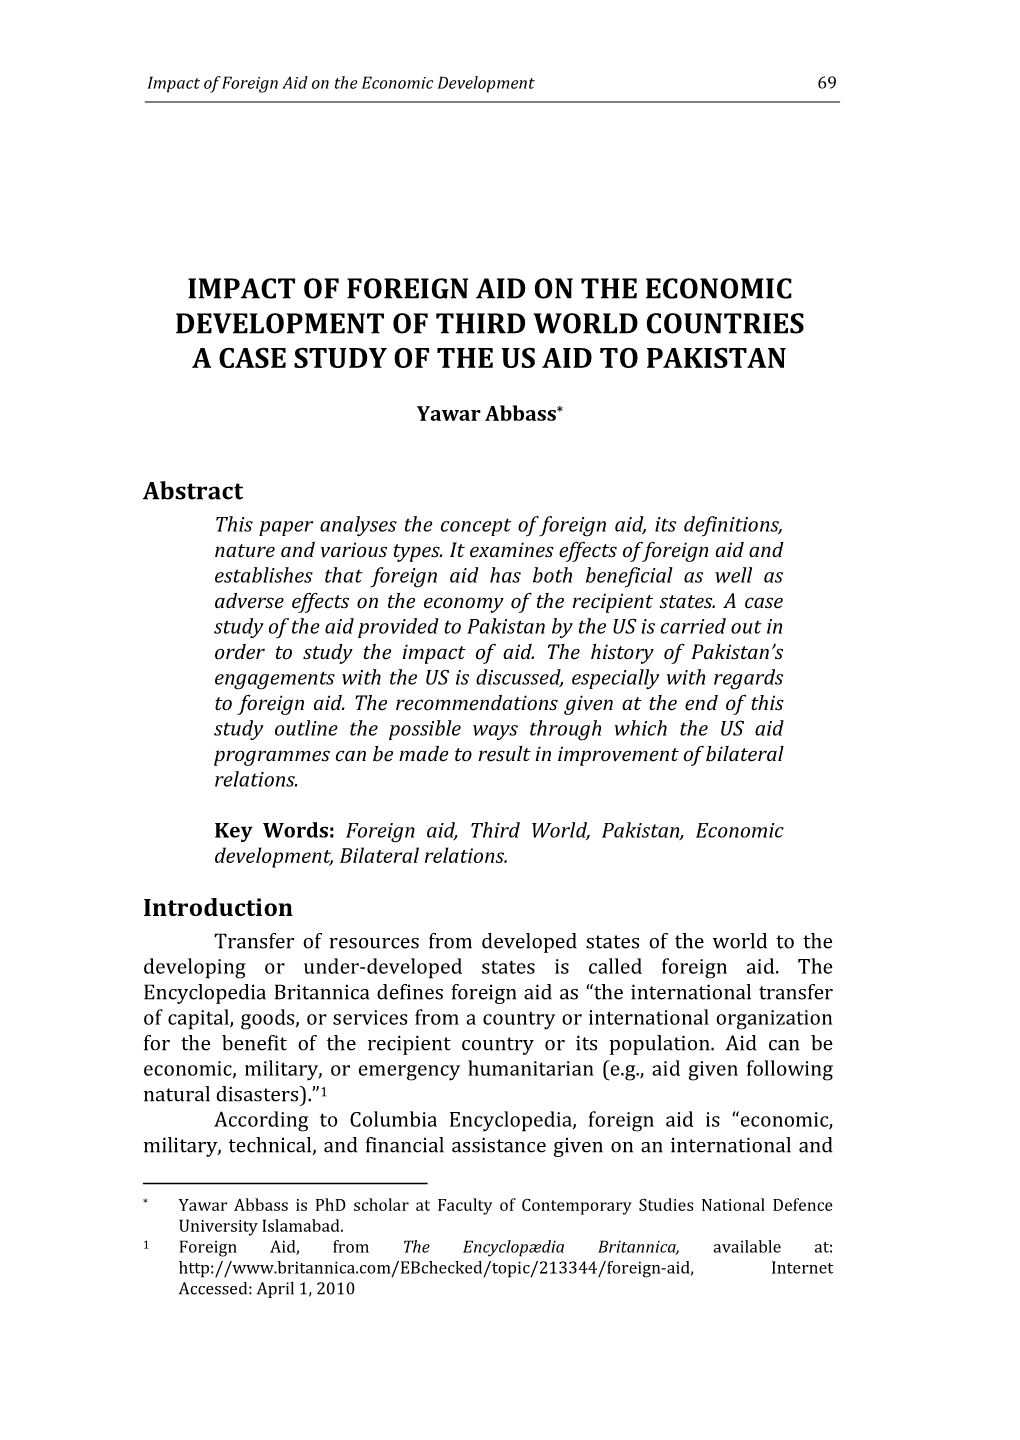 Impact of Foreign Aid on the Economic Development of Third World Countries a Case Study of the Us Aid to Pakistan